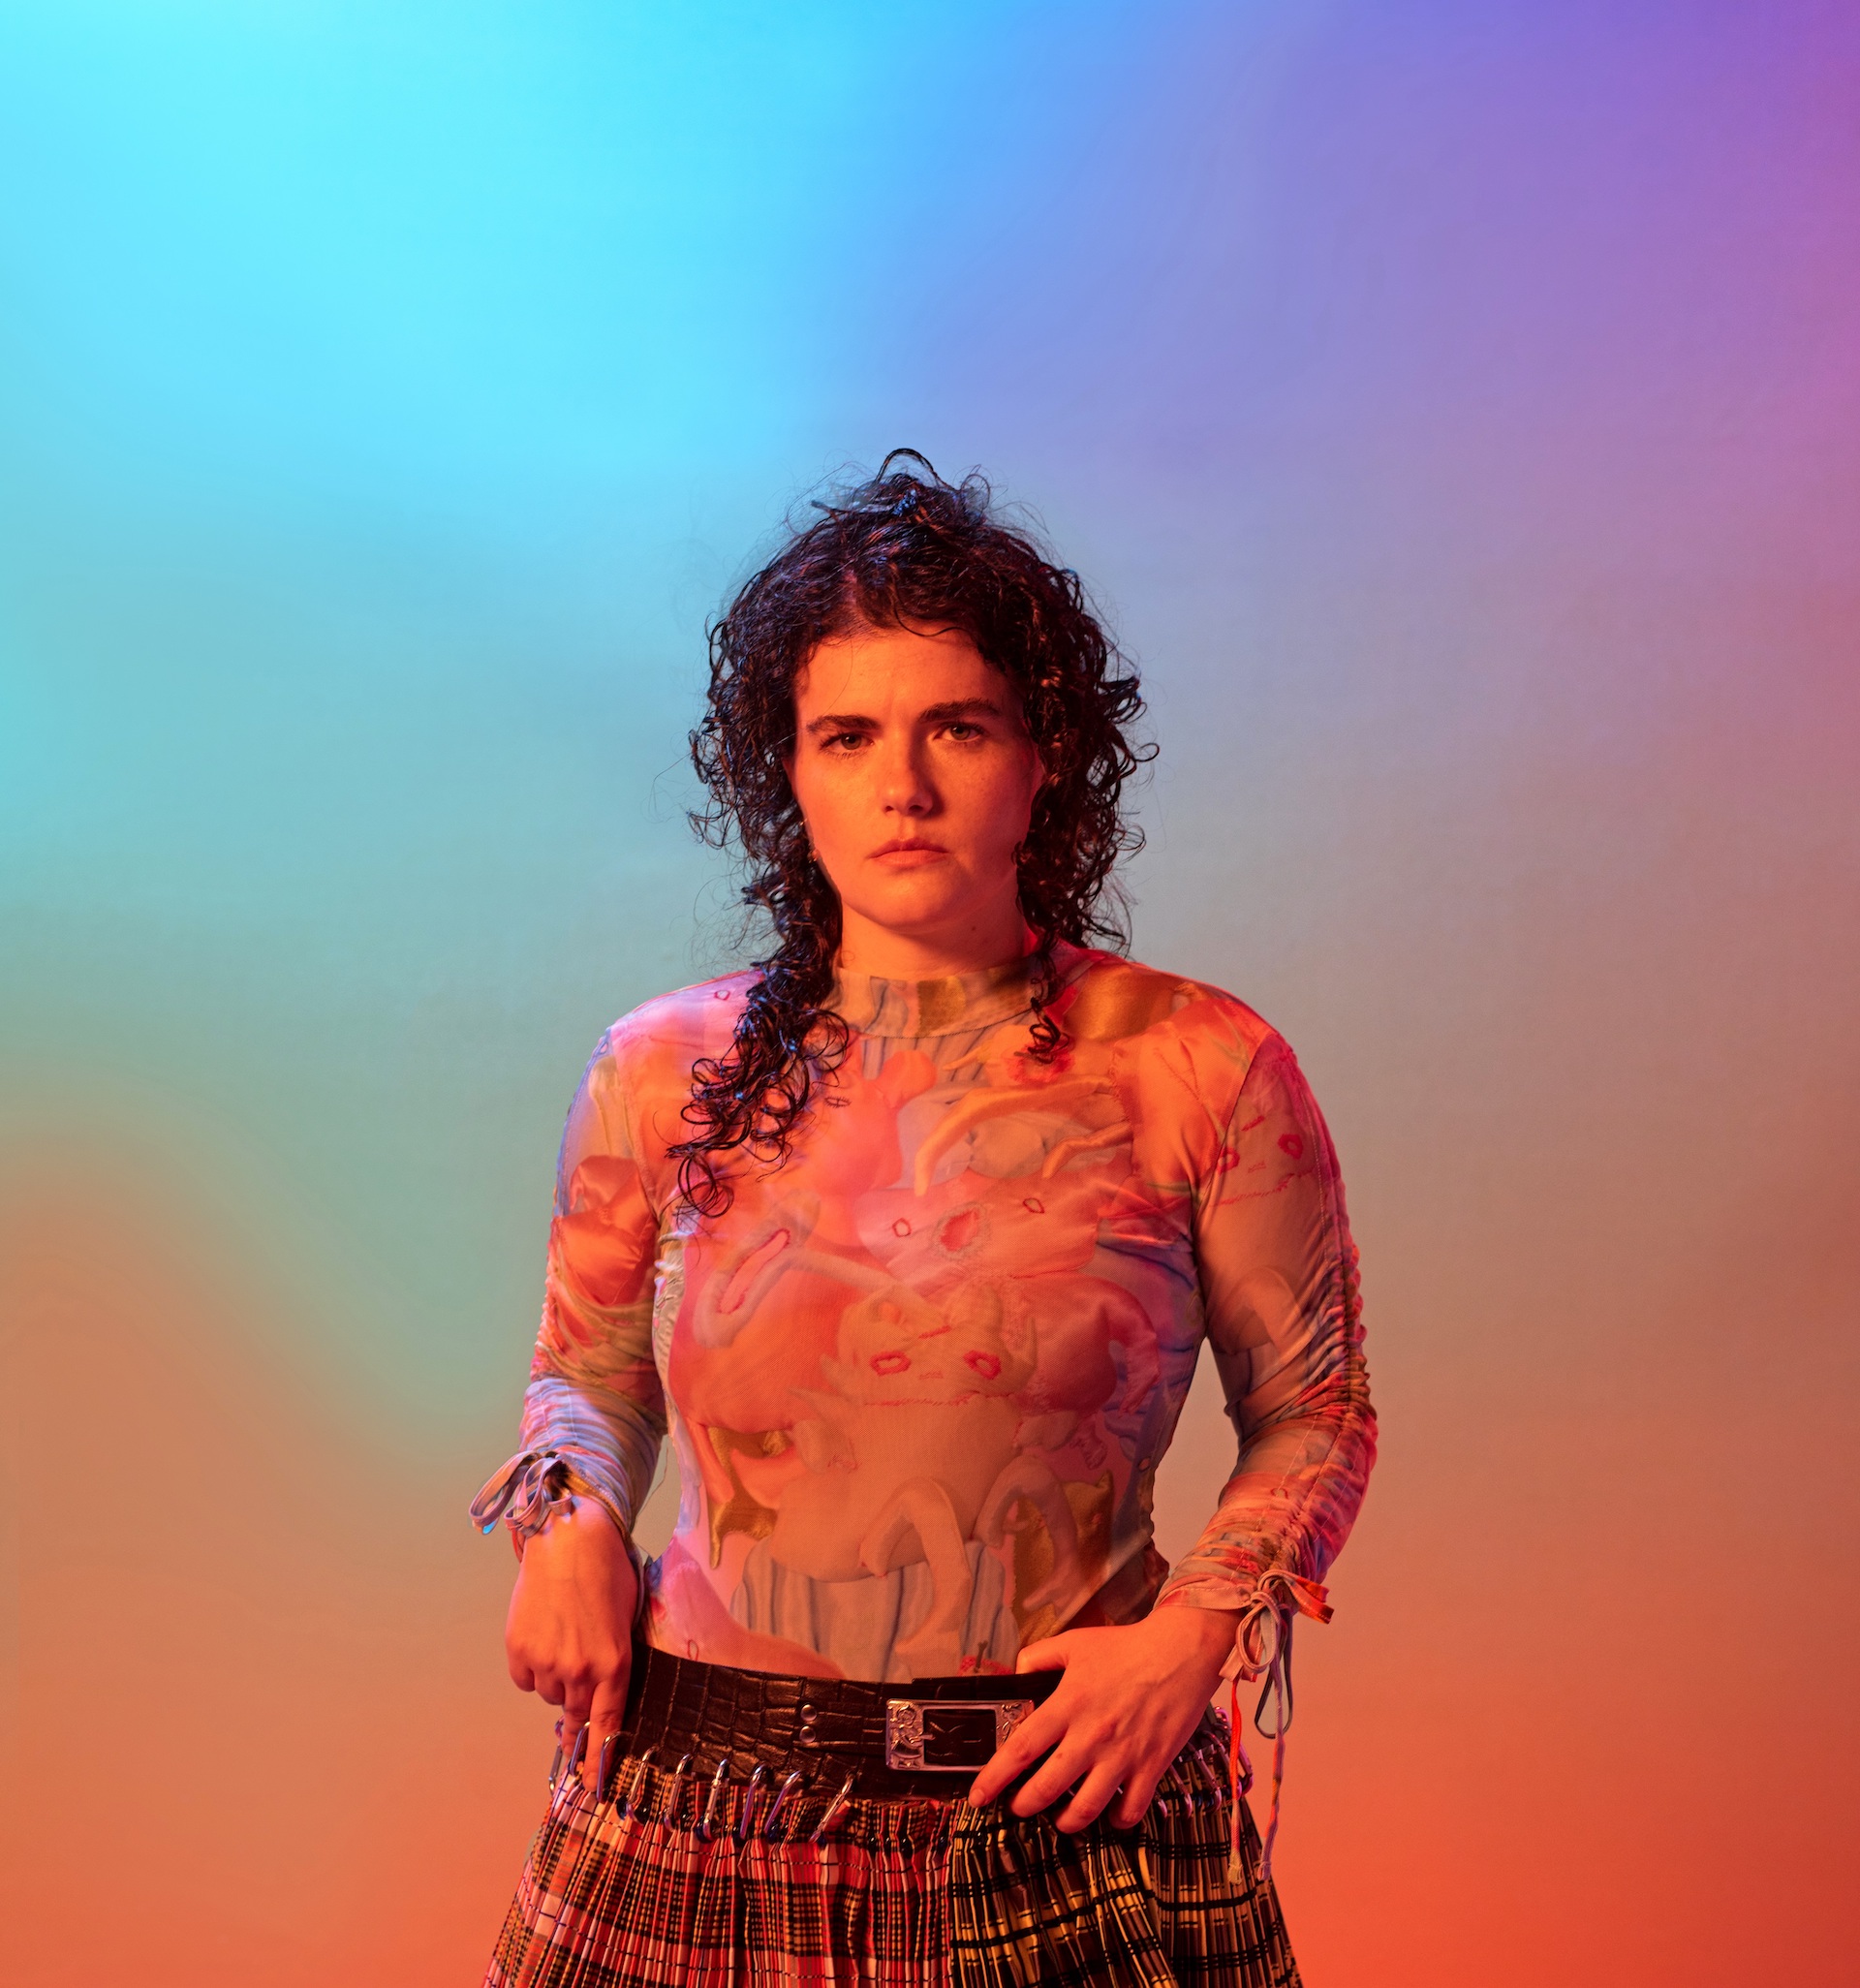 Electronic artist Georgia by Will Spooner, photographed against multicoloured background